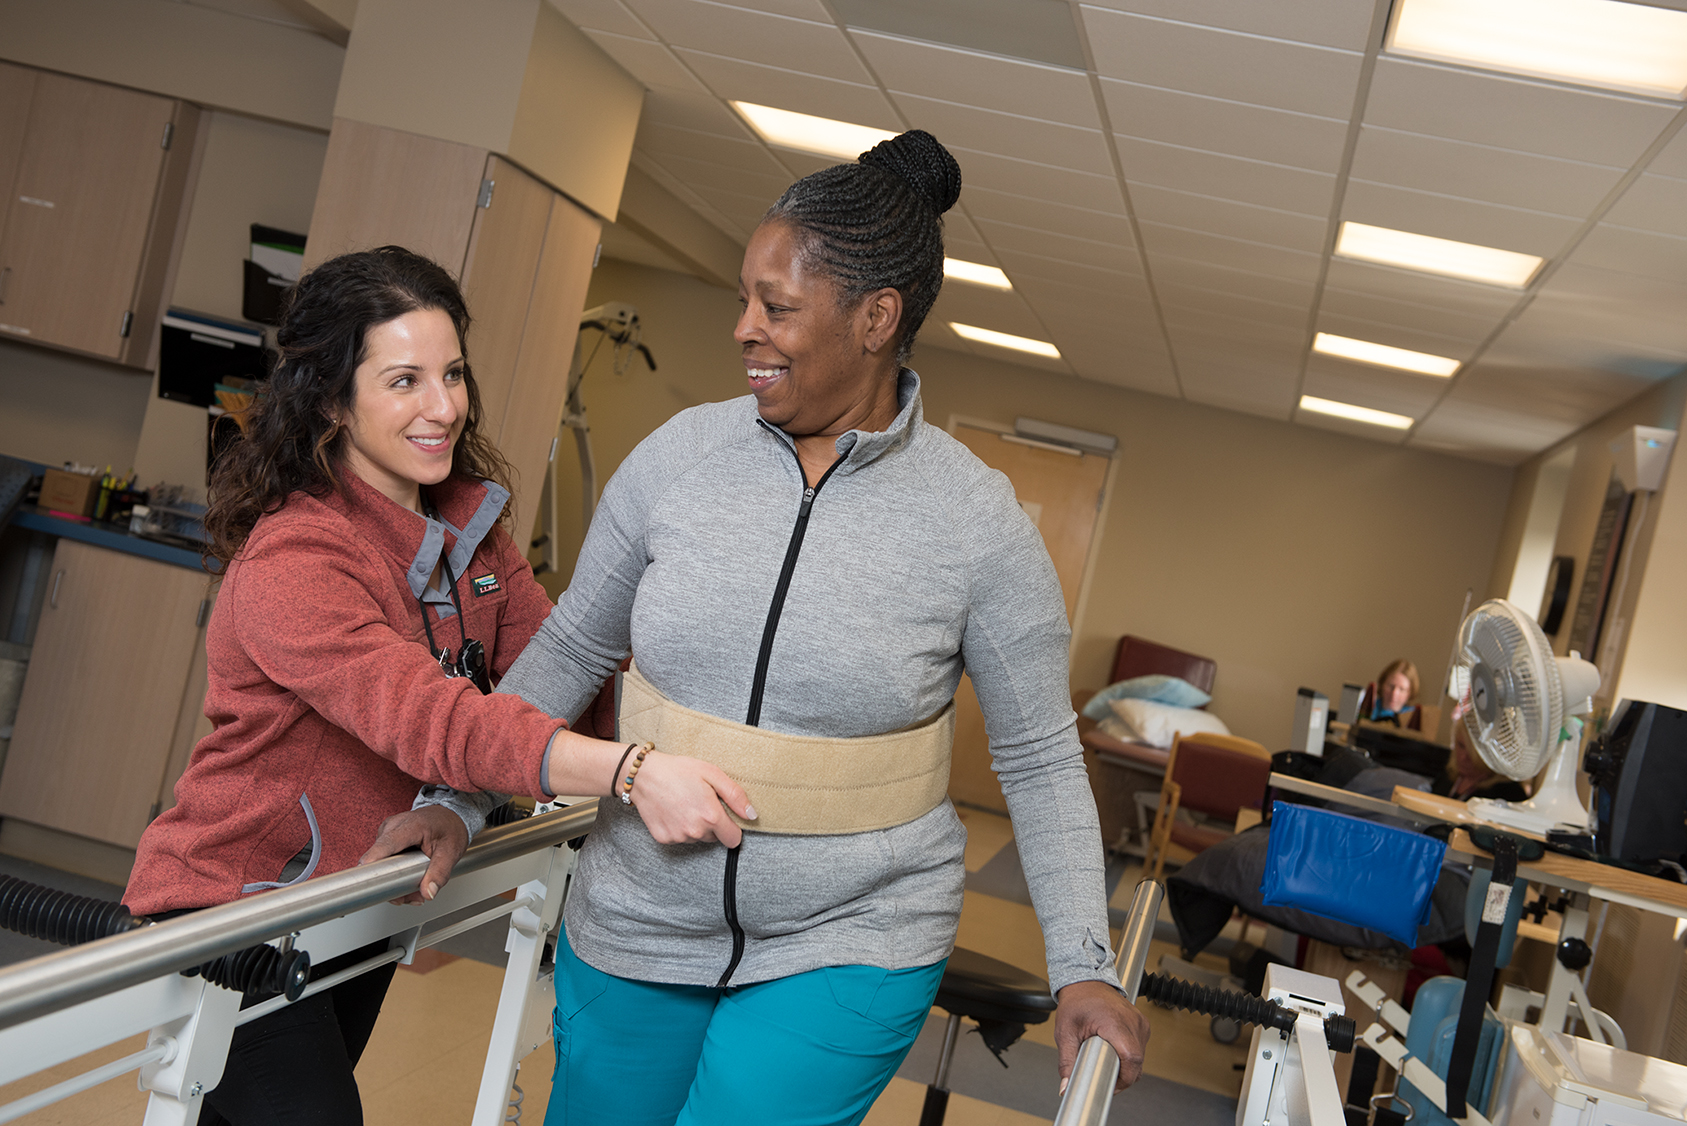 Physical therapist Nicole Conese, left, and Karen Renfroe demonstrate walking with a back support in the rehabilitation center at Upstate University Hospital's Community campus. (photo by Susan Kahn)